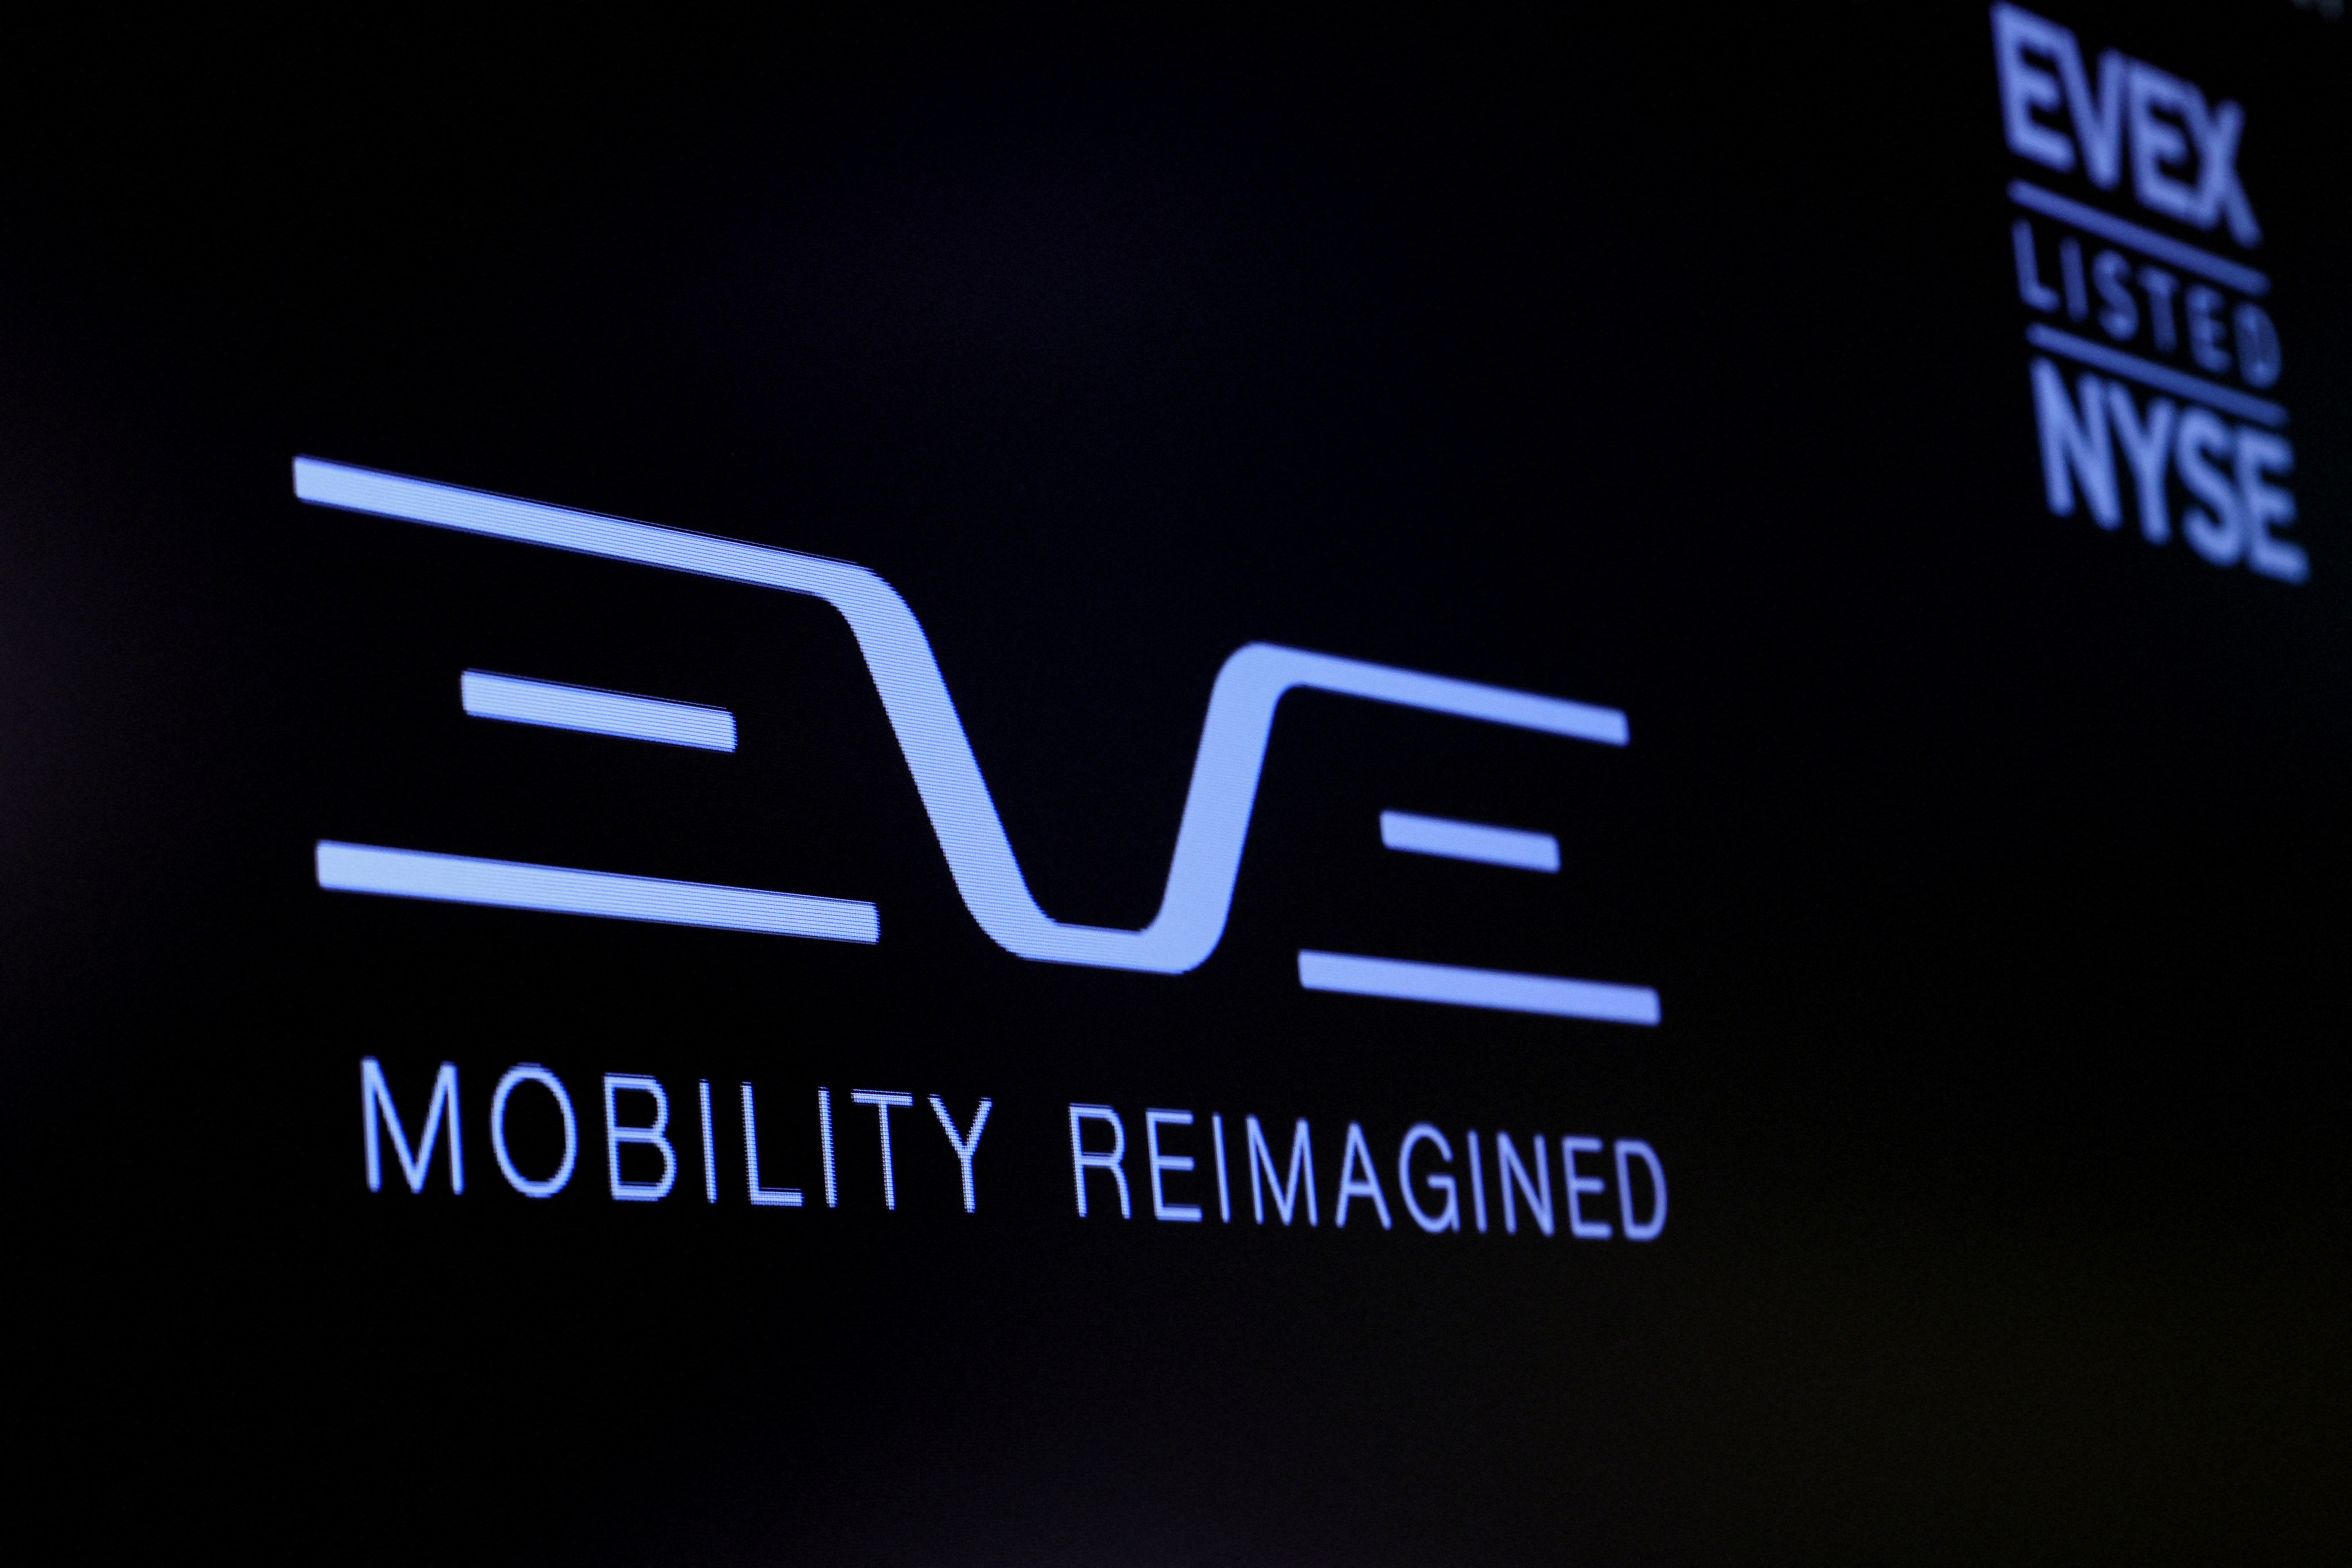 The logo for Eve Air Mobility is displayed on a screen during the company’s debut on the floor of the NYSE in New York